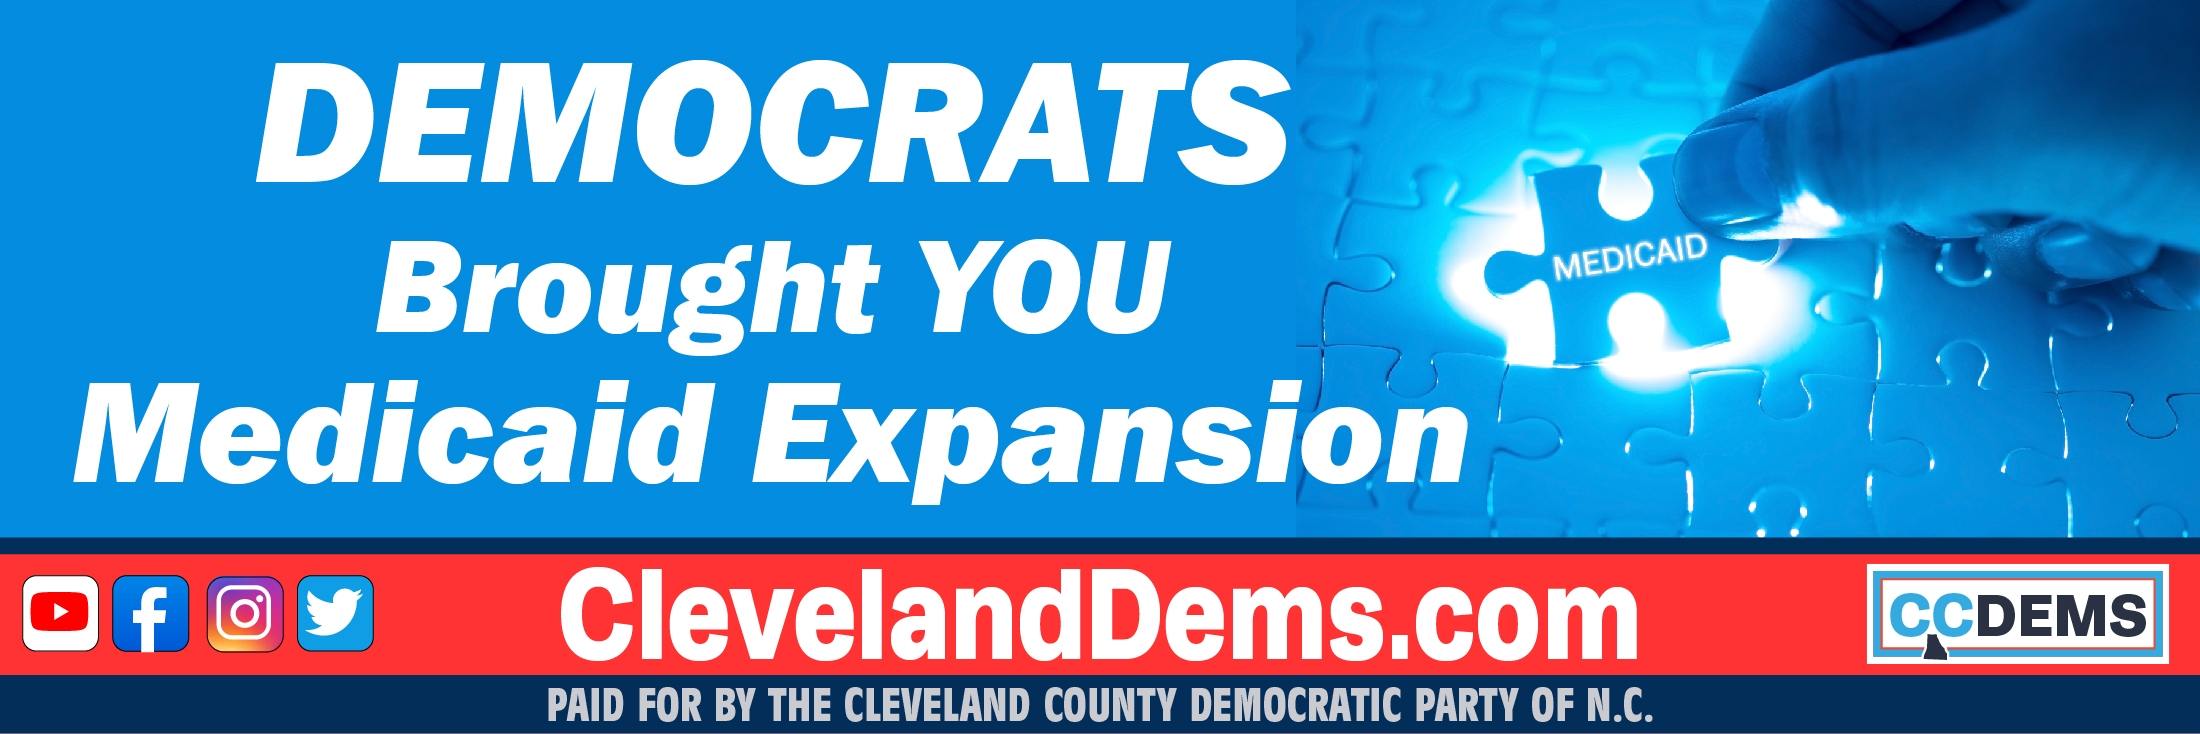 Democrats Brought You Medicaid Expansion